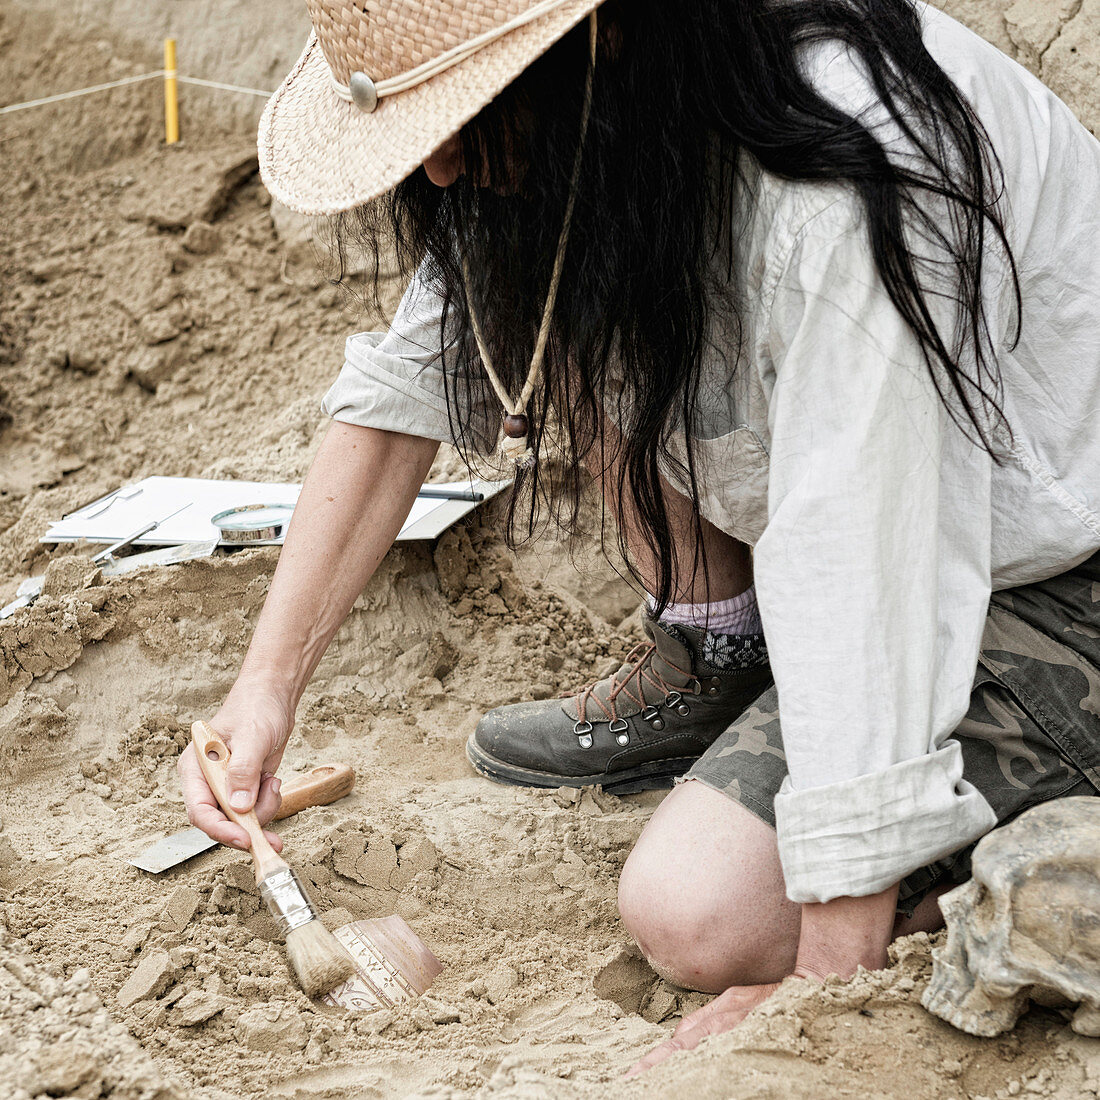 Archaeologist excavating pottery